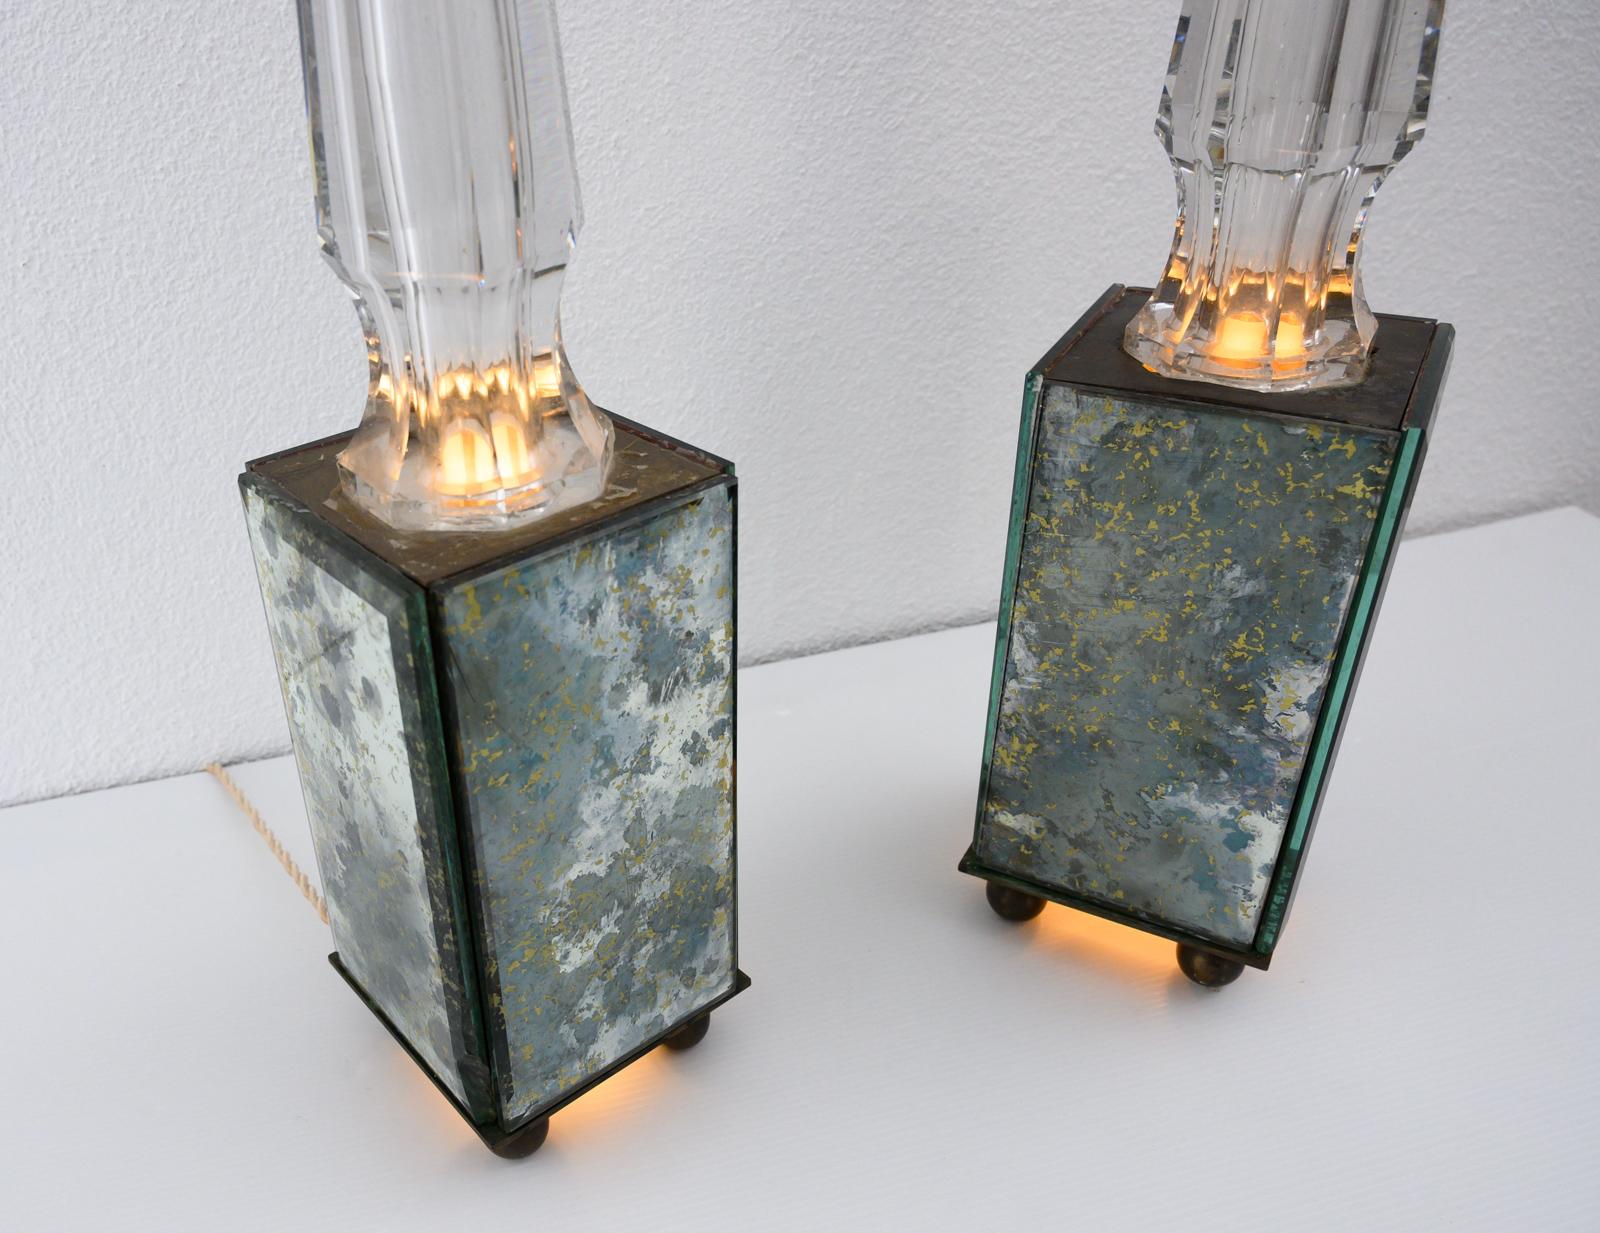 French Pair of Obelisk Lamps in the Style of Serge Roche, France circa 1940